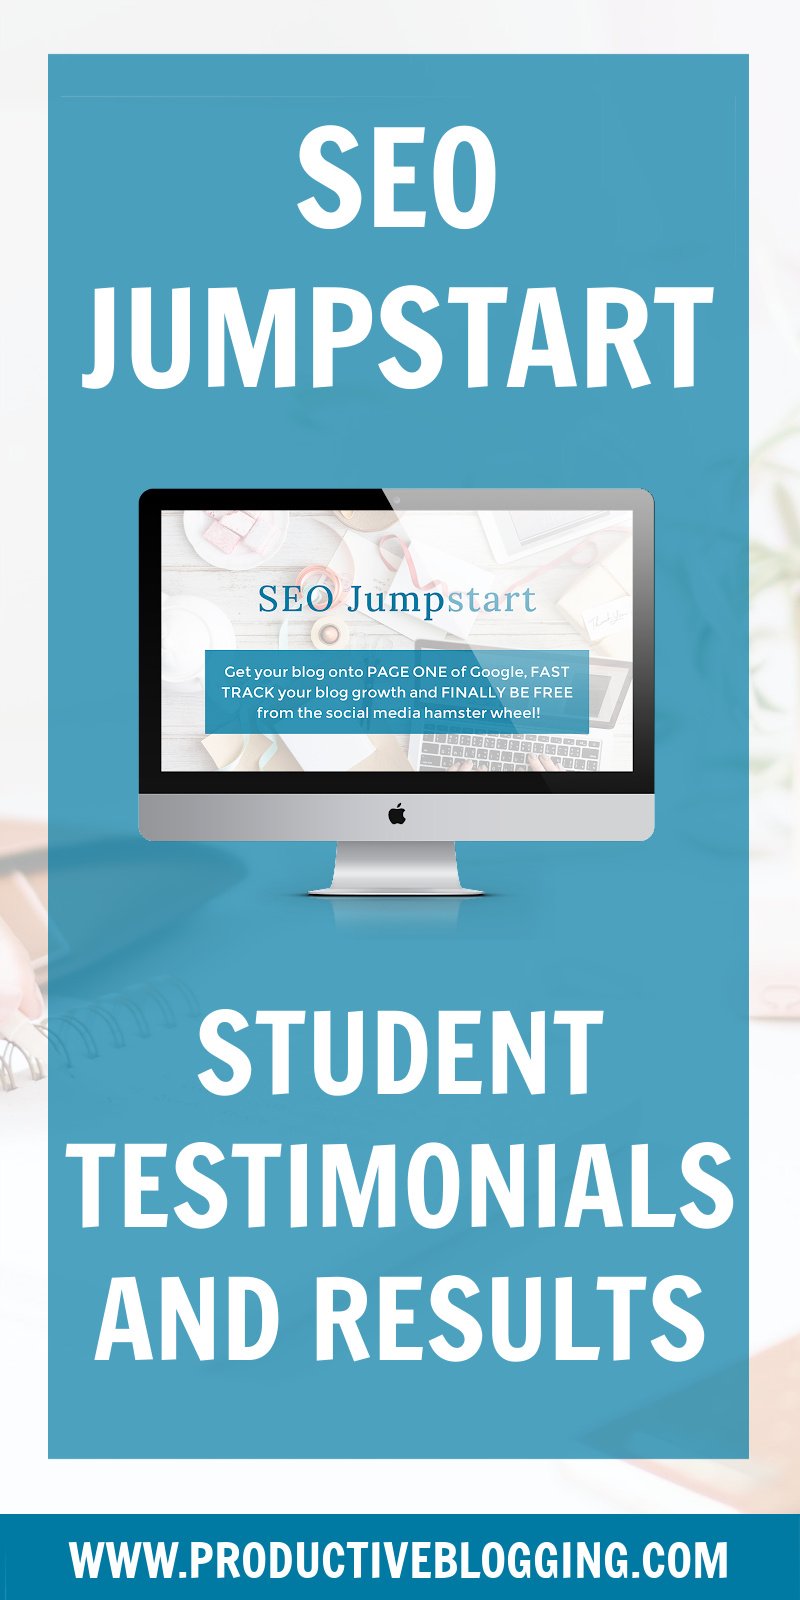 If you are considering buying an SEO course, you want to know if it works, right? Well, who better to tell you than students who’ve taken the course? I’ve collated dozens of testimonials from SEO Jumpstart students, sharing how they got on with the course and what results they achieved #seojumpstart #seocourse #seocoursetestimonials #googleSEO #SEO #SEOtips #SEOhacks #searchengineoptimization #SEOforbloggers #blogSEO #growyourblog #bloggrowth #bloggingtips #blogtips #blogging #productiveblogging